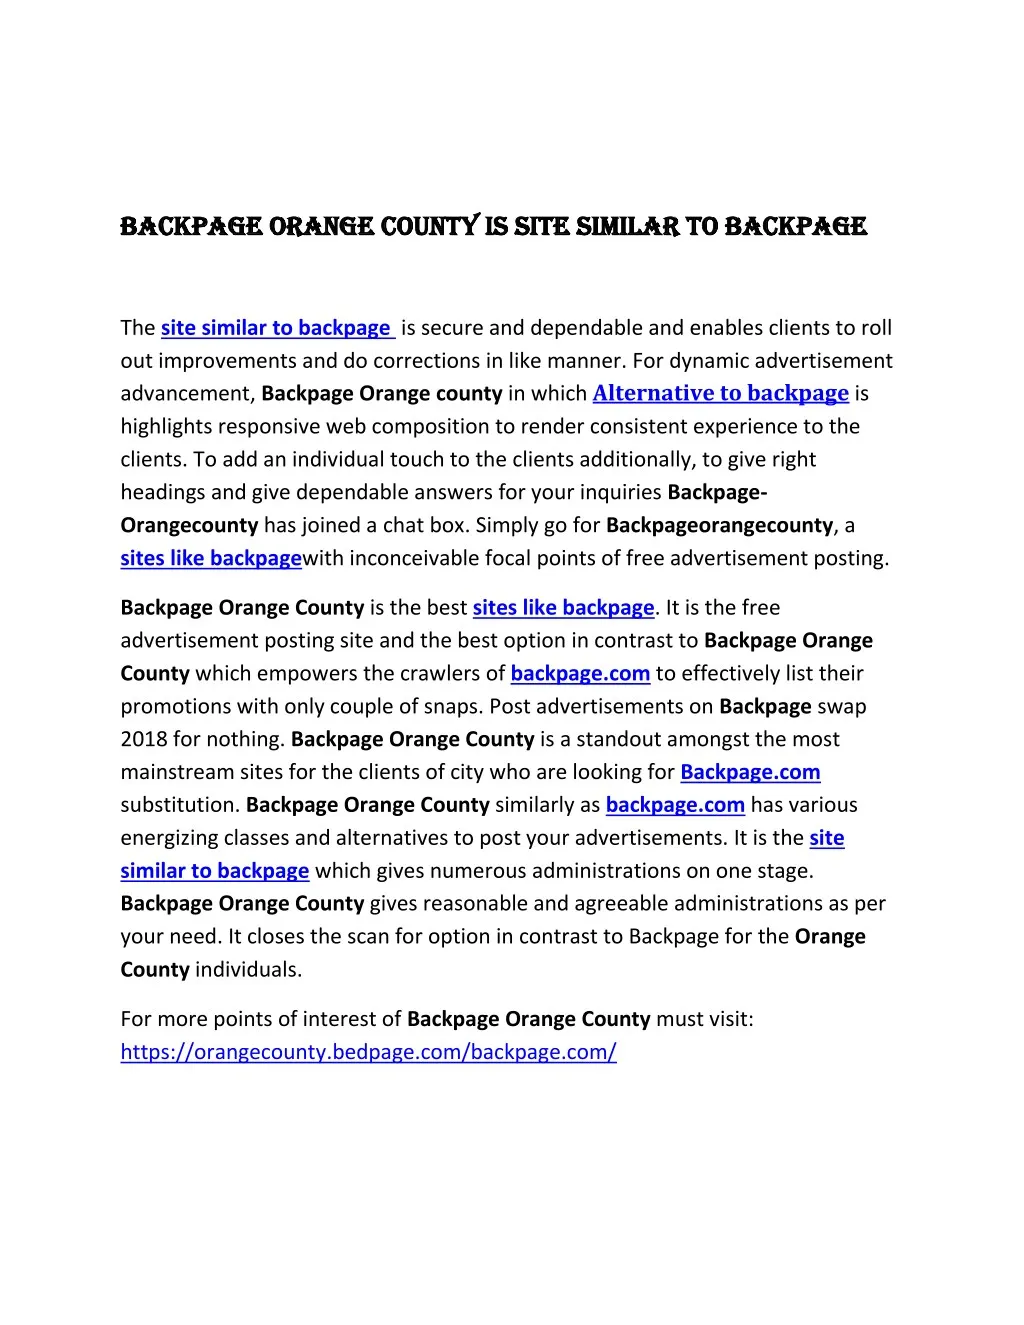 backpage orange county is site similar